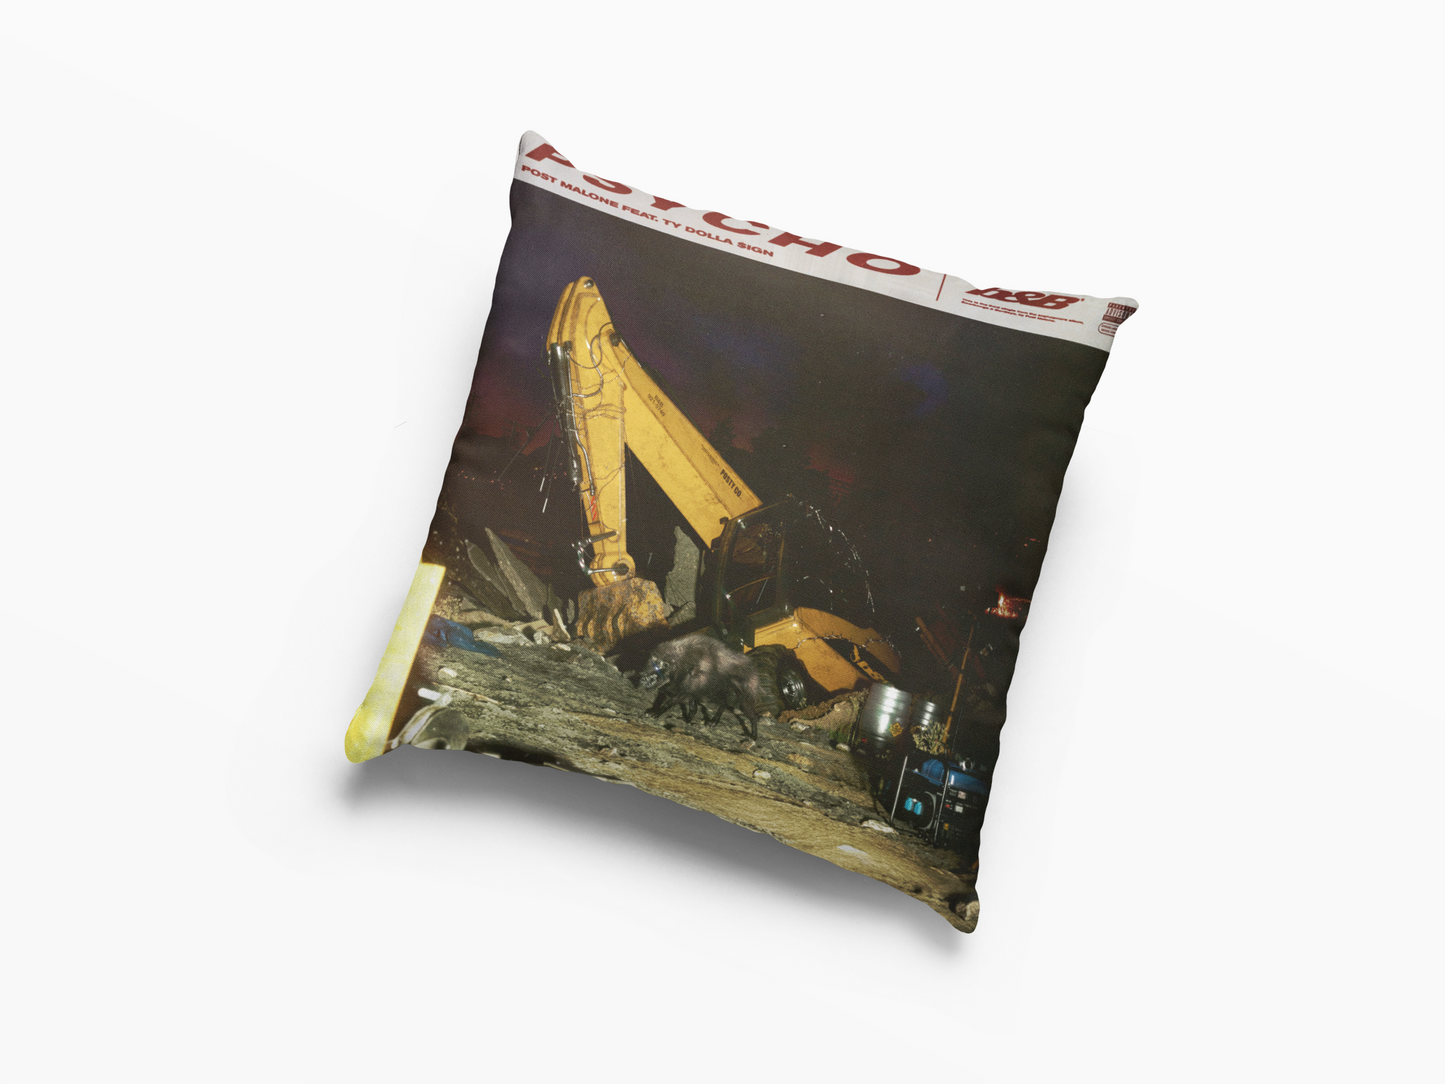 Post Malone Psycho Cushion Case / Pillow Case